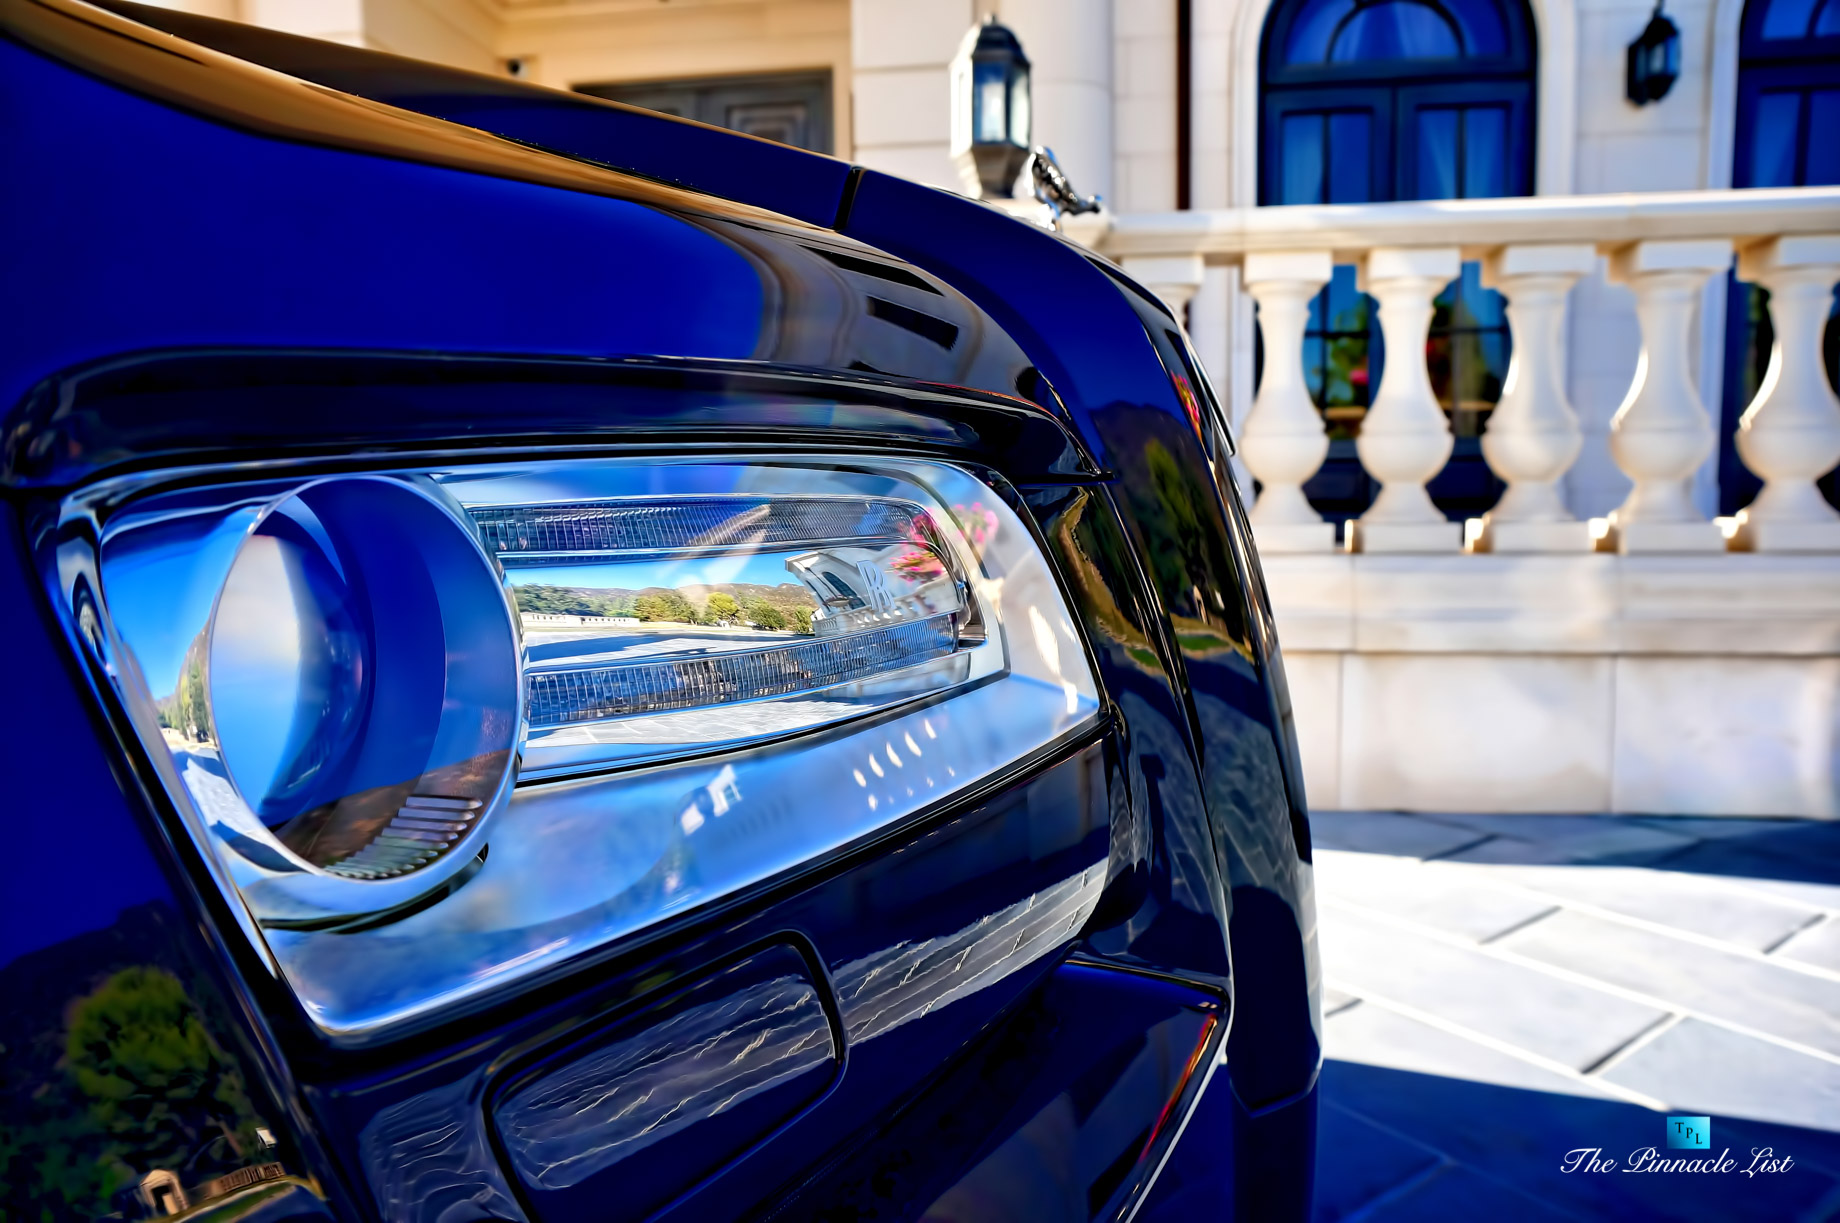 Luxury Defined - Rolls-Royce Ghost at The Bradbury Estate in Southern California